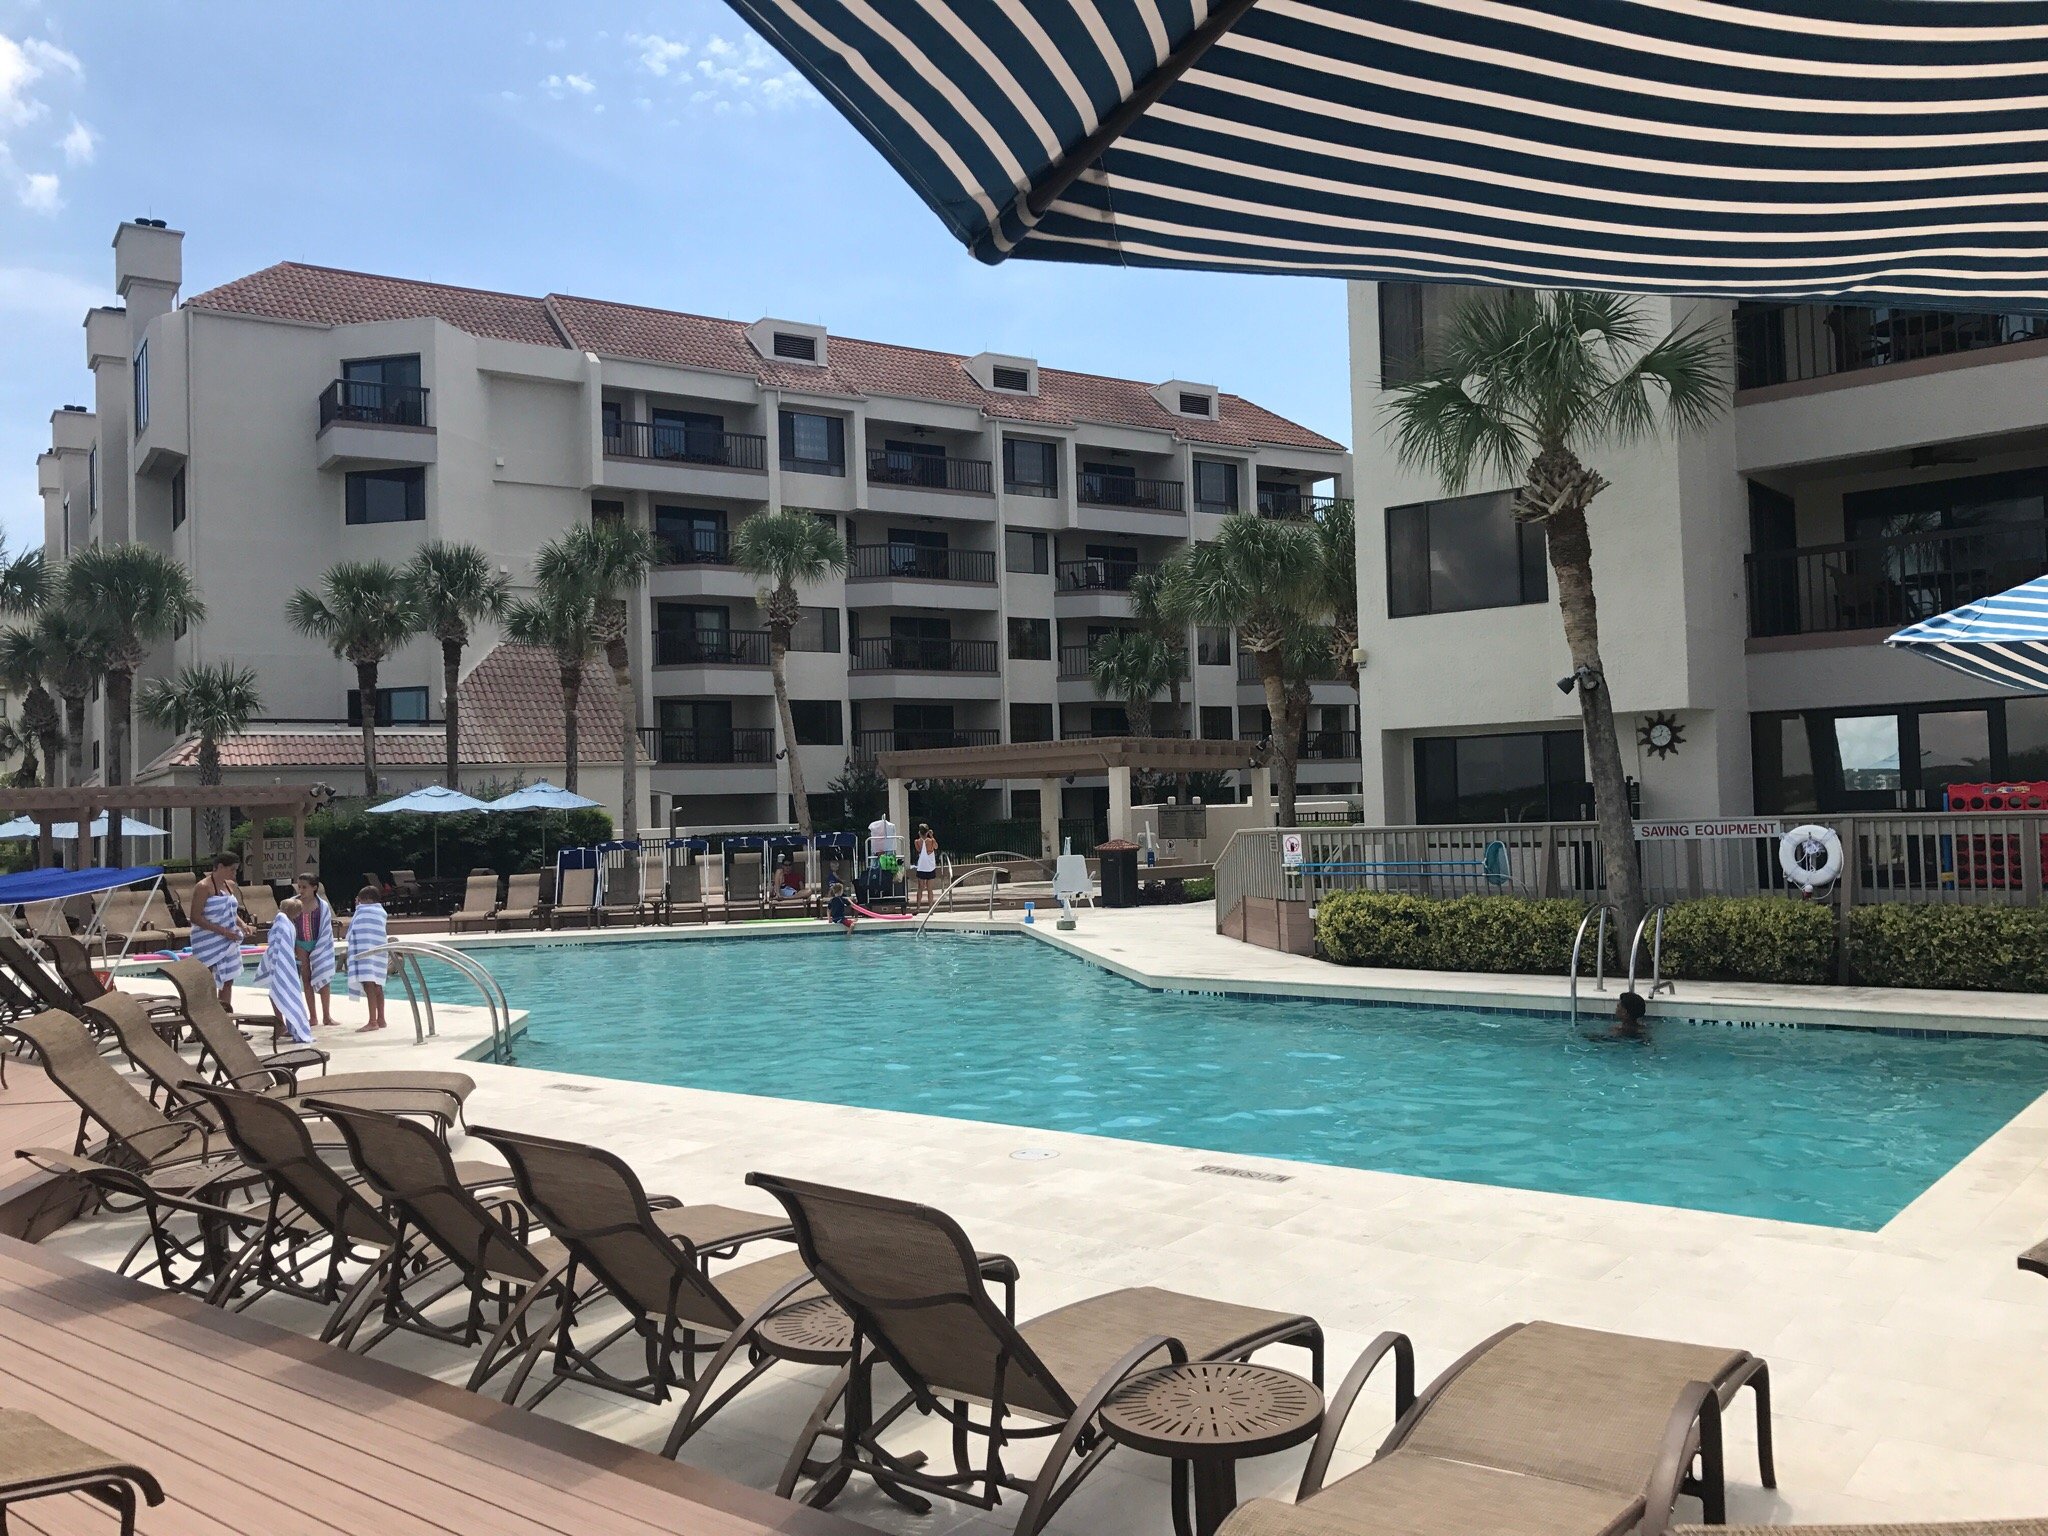 Marriott's Sunset Pointe At Shelter Cove Pool